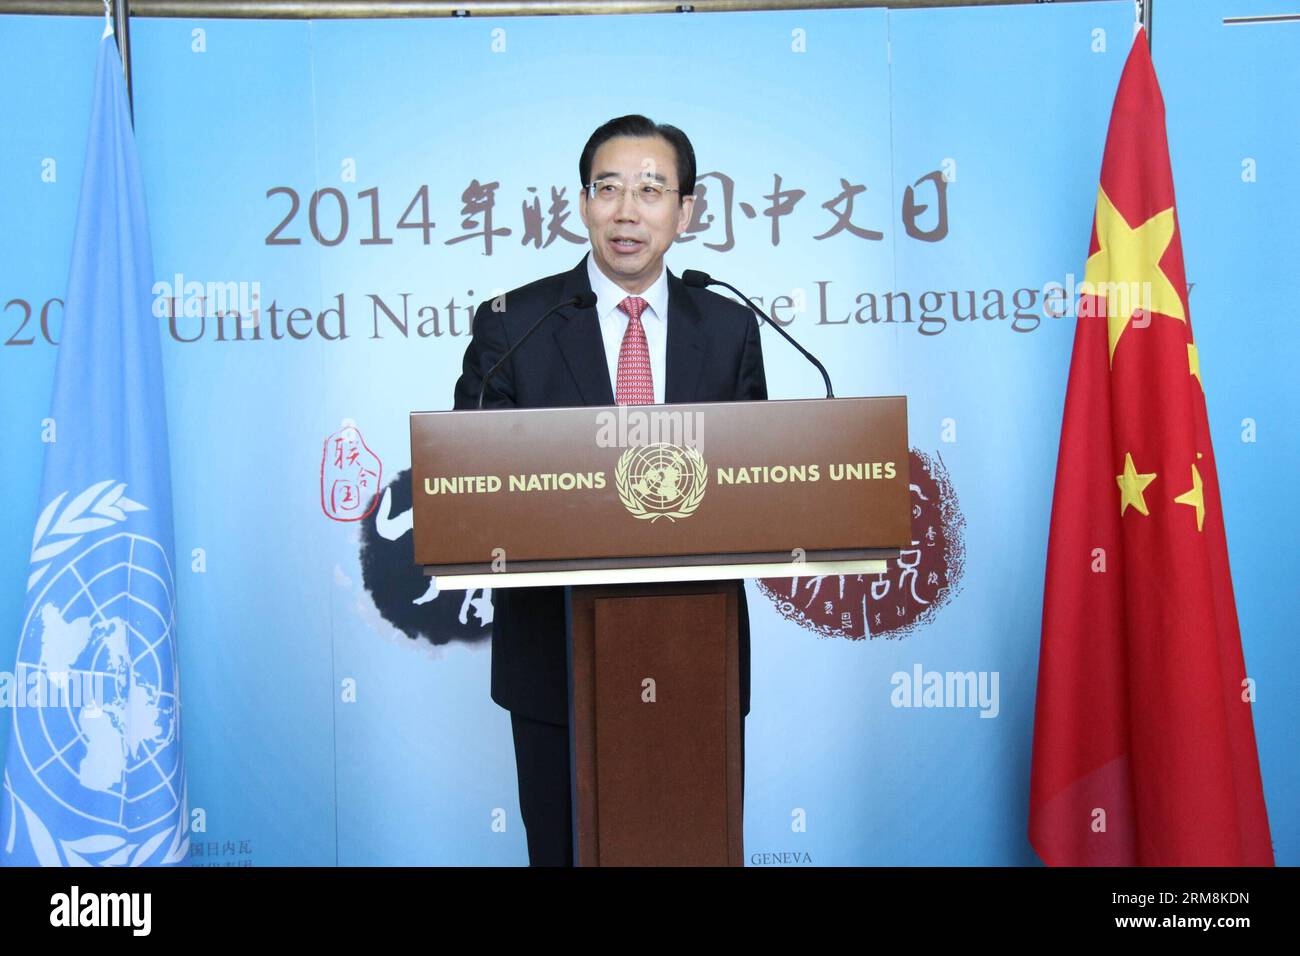 Wu Hailong, Chinese representative to the United Nations Office at Geneva and Other International Organizations in Switzerland, addresses the Chinese hieroglyphs exhibition in Geneva, Switzerland, April 17, 2014. The exhibition was held as part of the activities marking the 2014 United Nations Chinese Language Day. (Xinhua) SWITZERLAND-GENEVA-CHINESE LANGUAGE-HIEROGLYPH-EXHIBITION PUBLICATIONxNOTxINxCHN   Wu Hailong Chinese Representative to The United Nations Office AT Geneva and Other International Organizations in Switzerland addresses The Chinese hieroglyphs Exhibition in Geneva Switzerlan Stock Photo